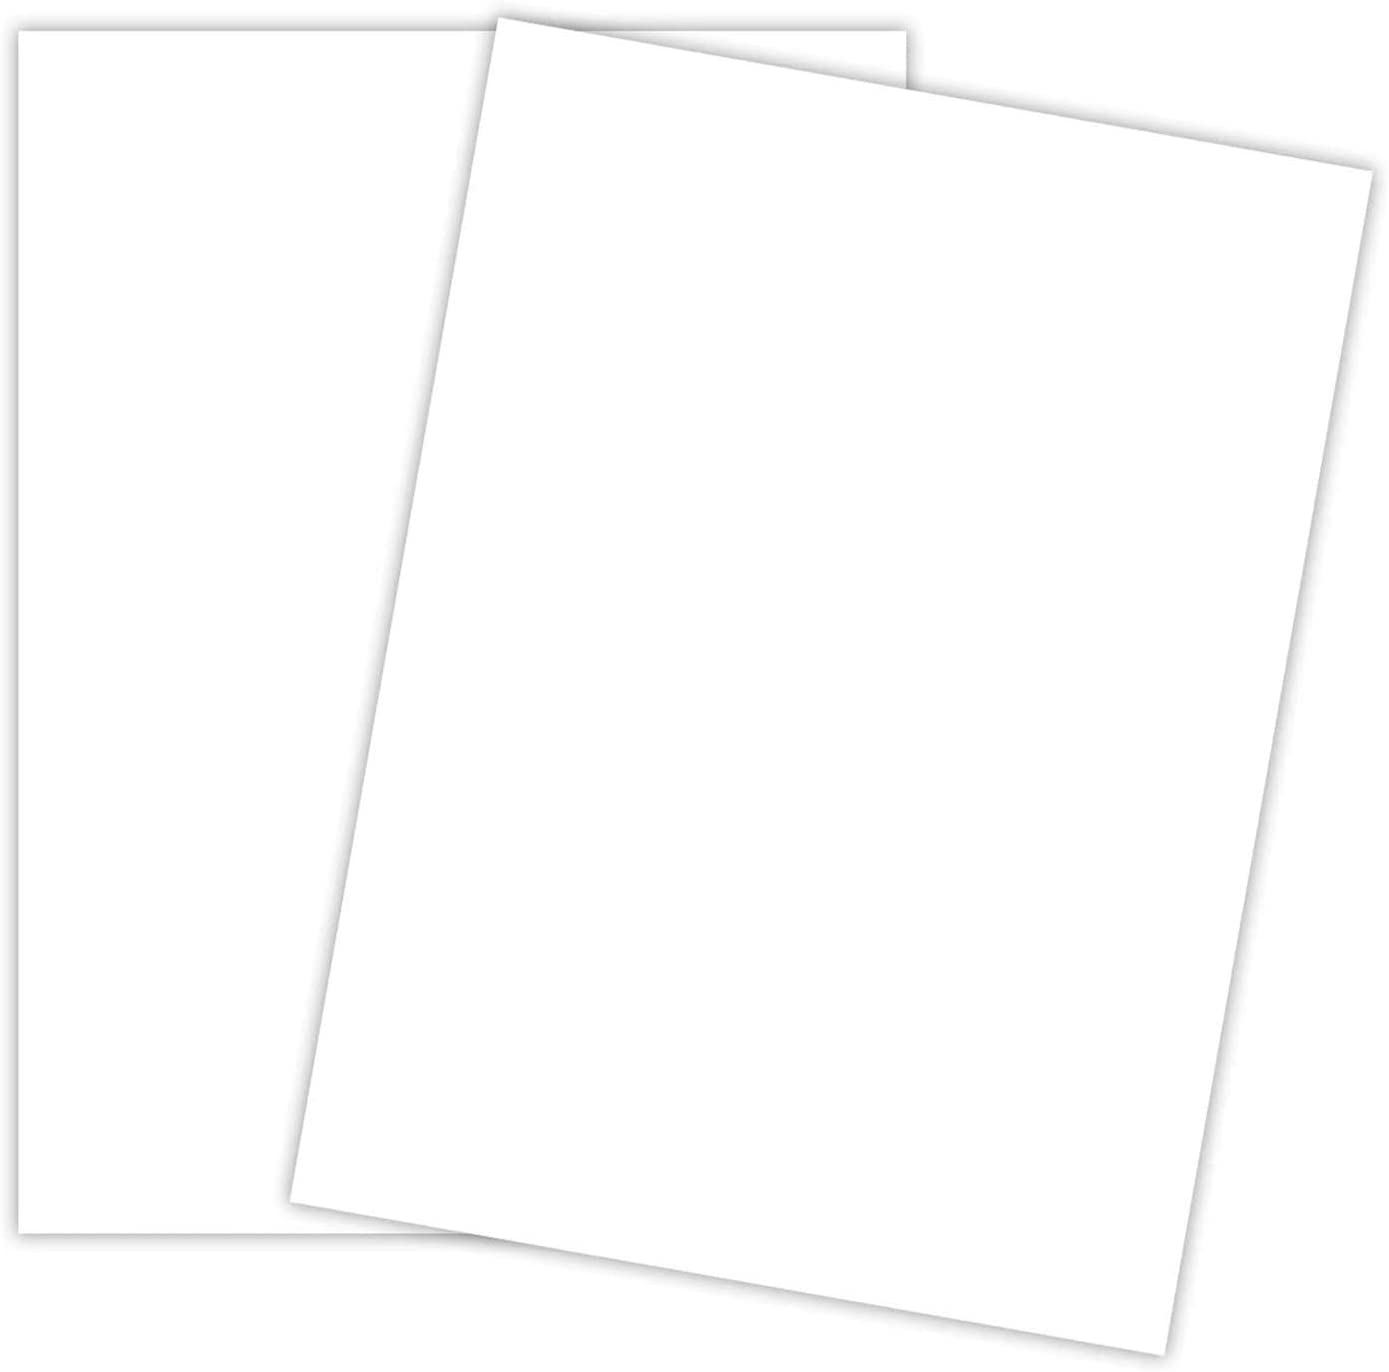 White Cardstock - Thick Paper for School, Arts and Crafts, Invitations, Stationary Printing | 65 lb Card Stock | 8.5 x 11 inch | Medium Weight Cover